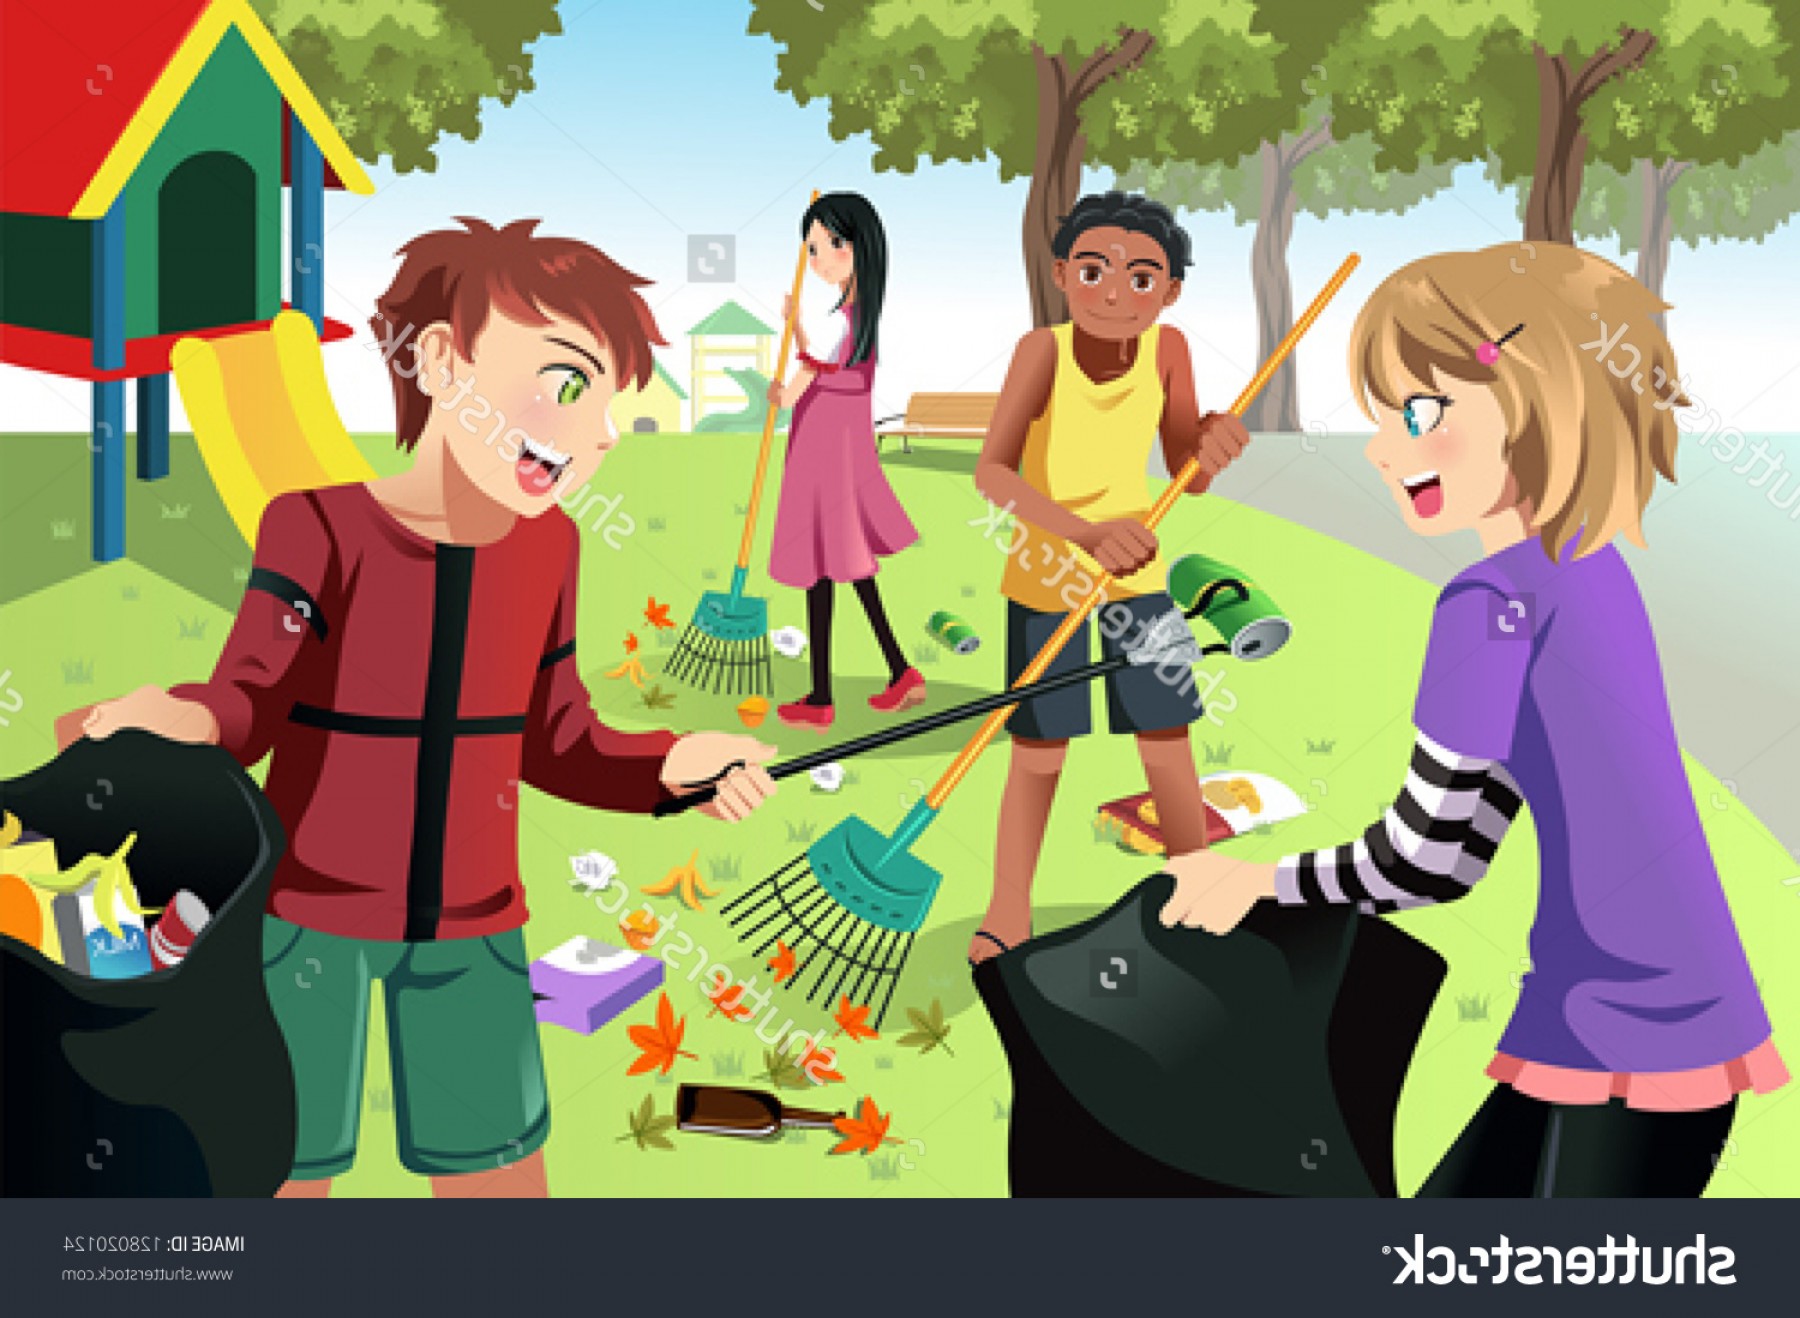 kids cleaning the environment clipart - Clipground